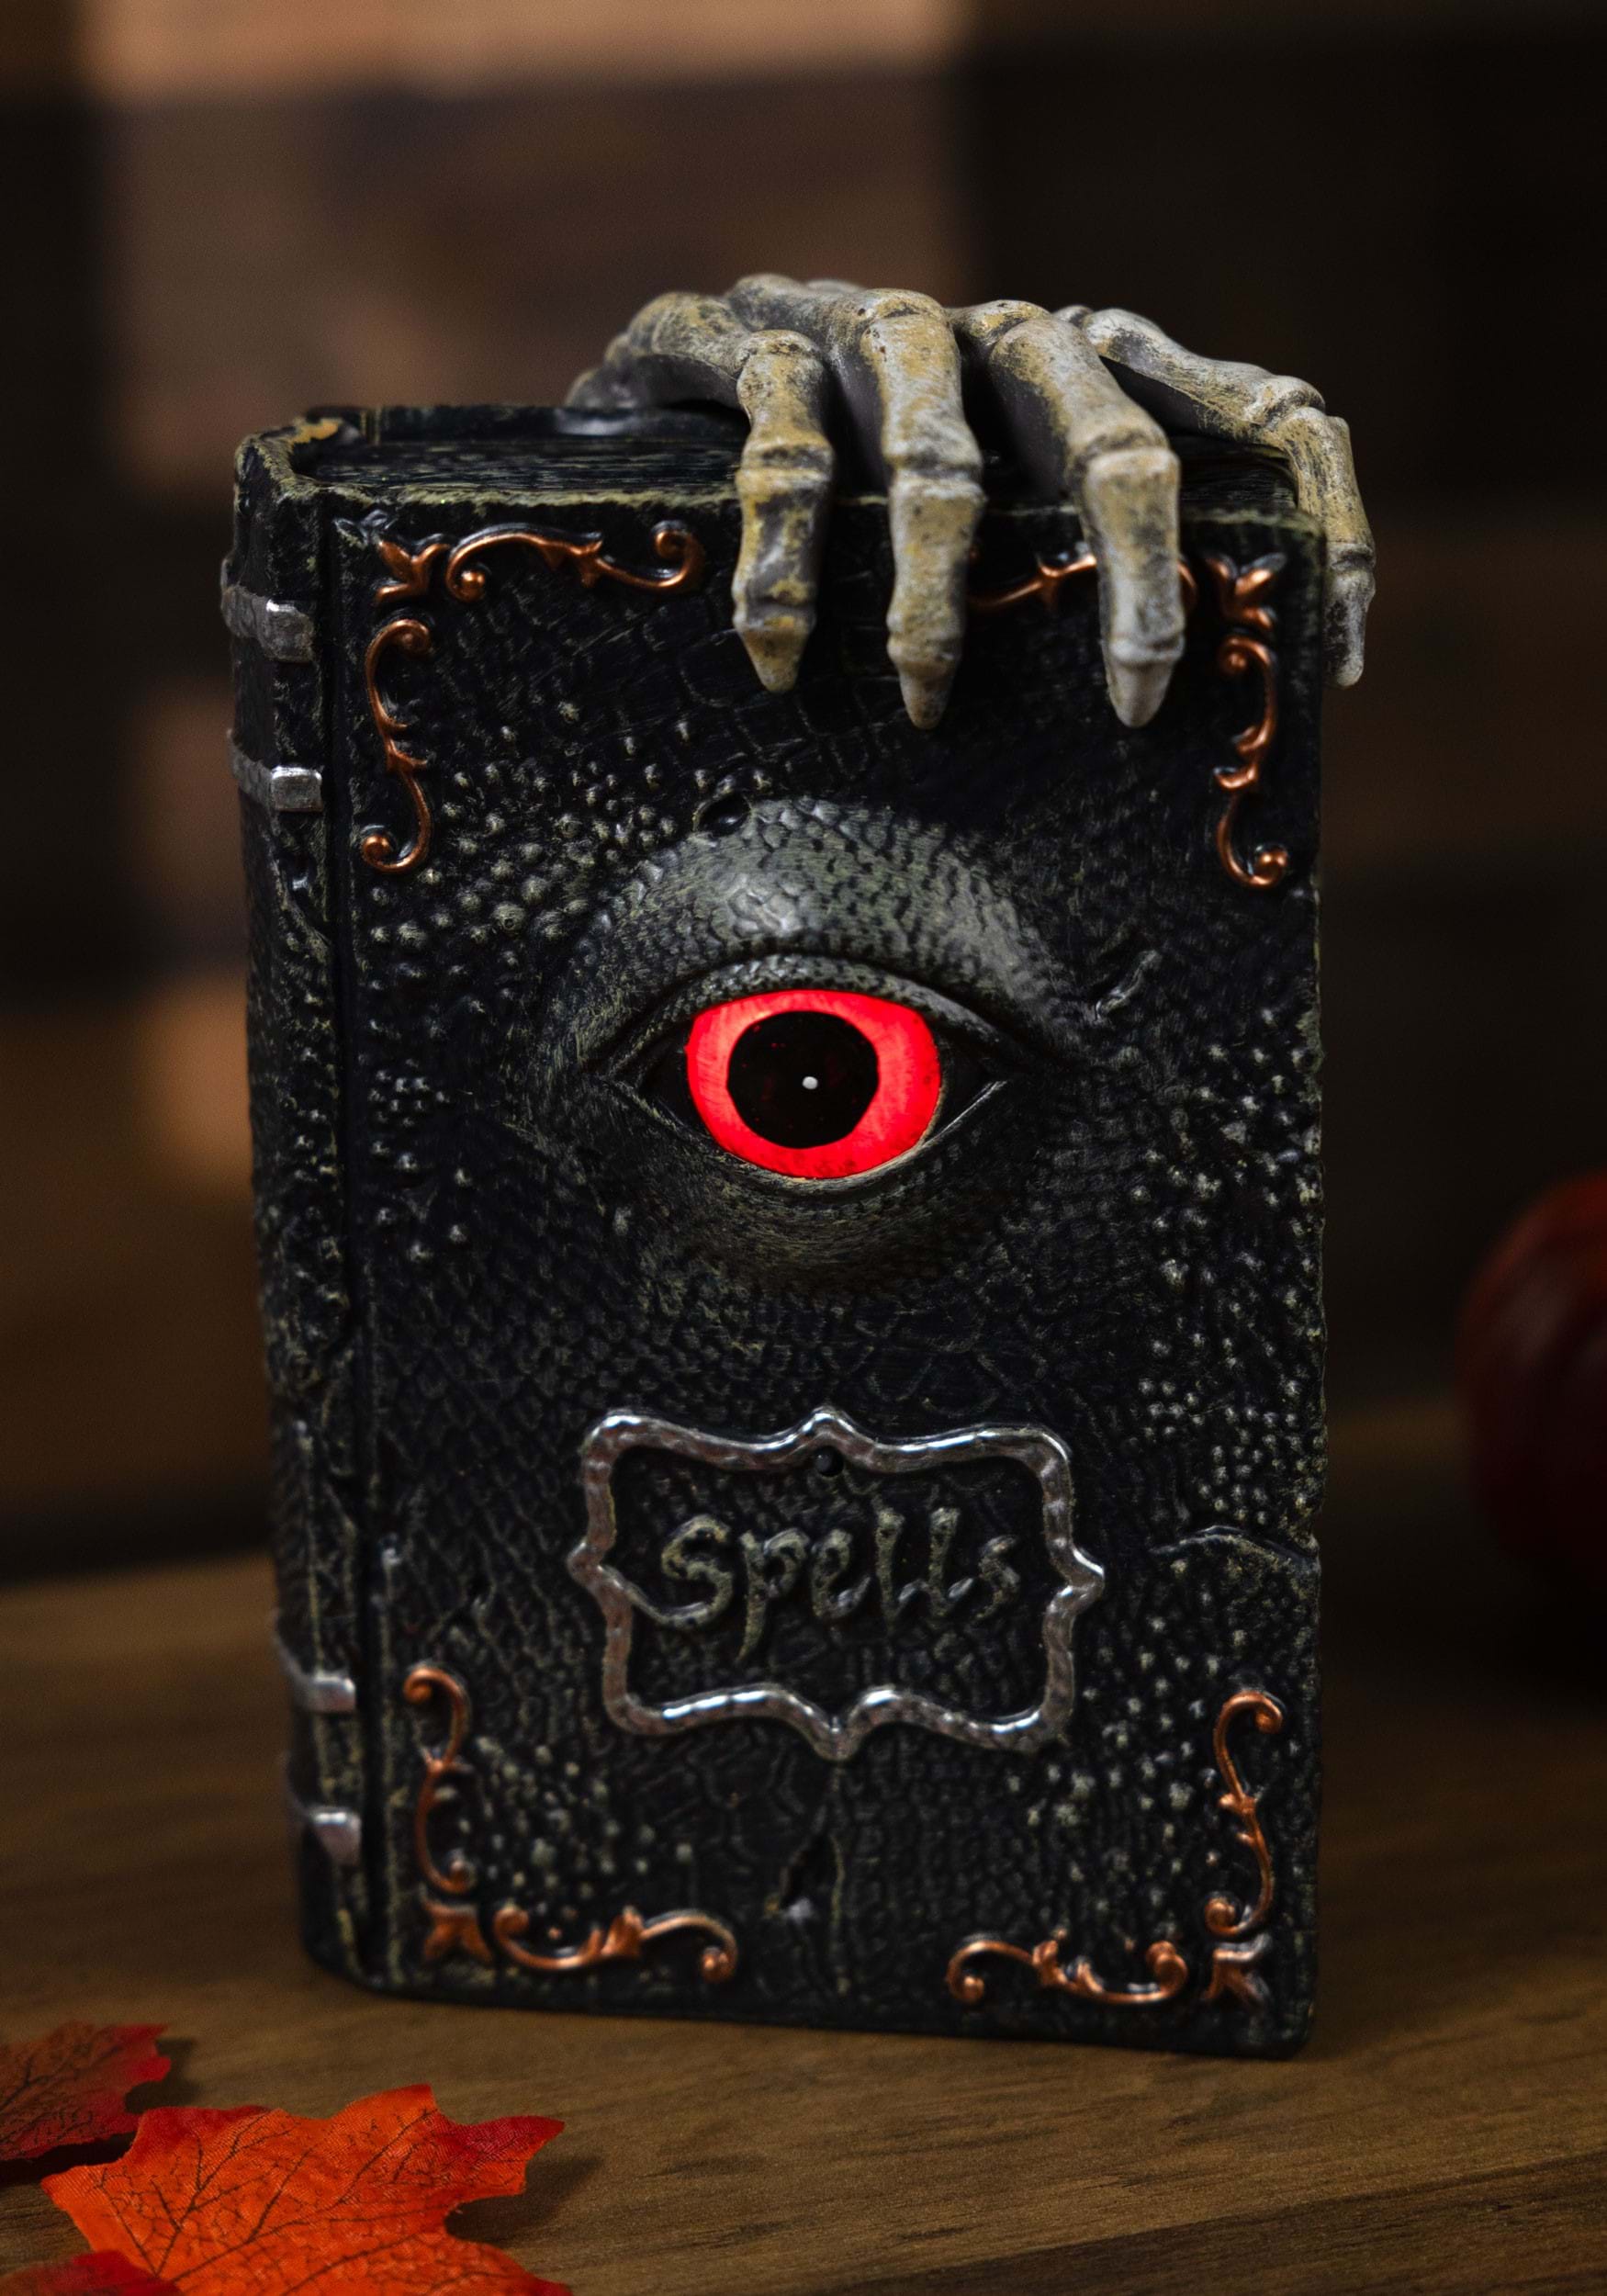 https://images.halloween.com/products/72030/2-1-301203/10-animated-dragon-eye-spell-book-alt-1.jpg